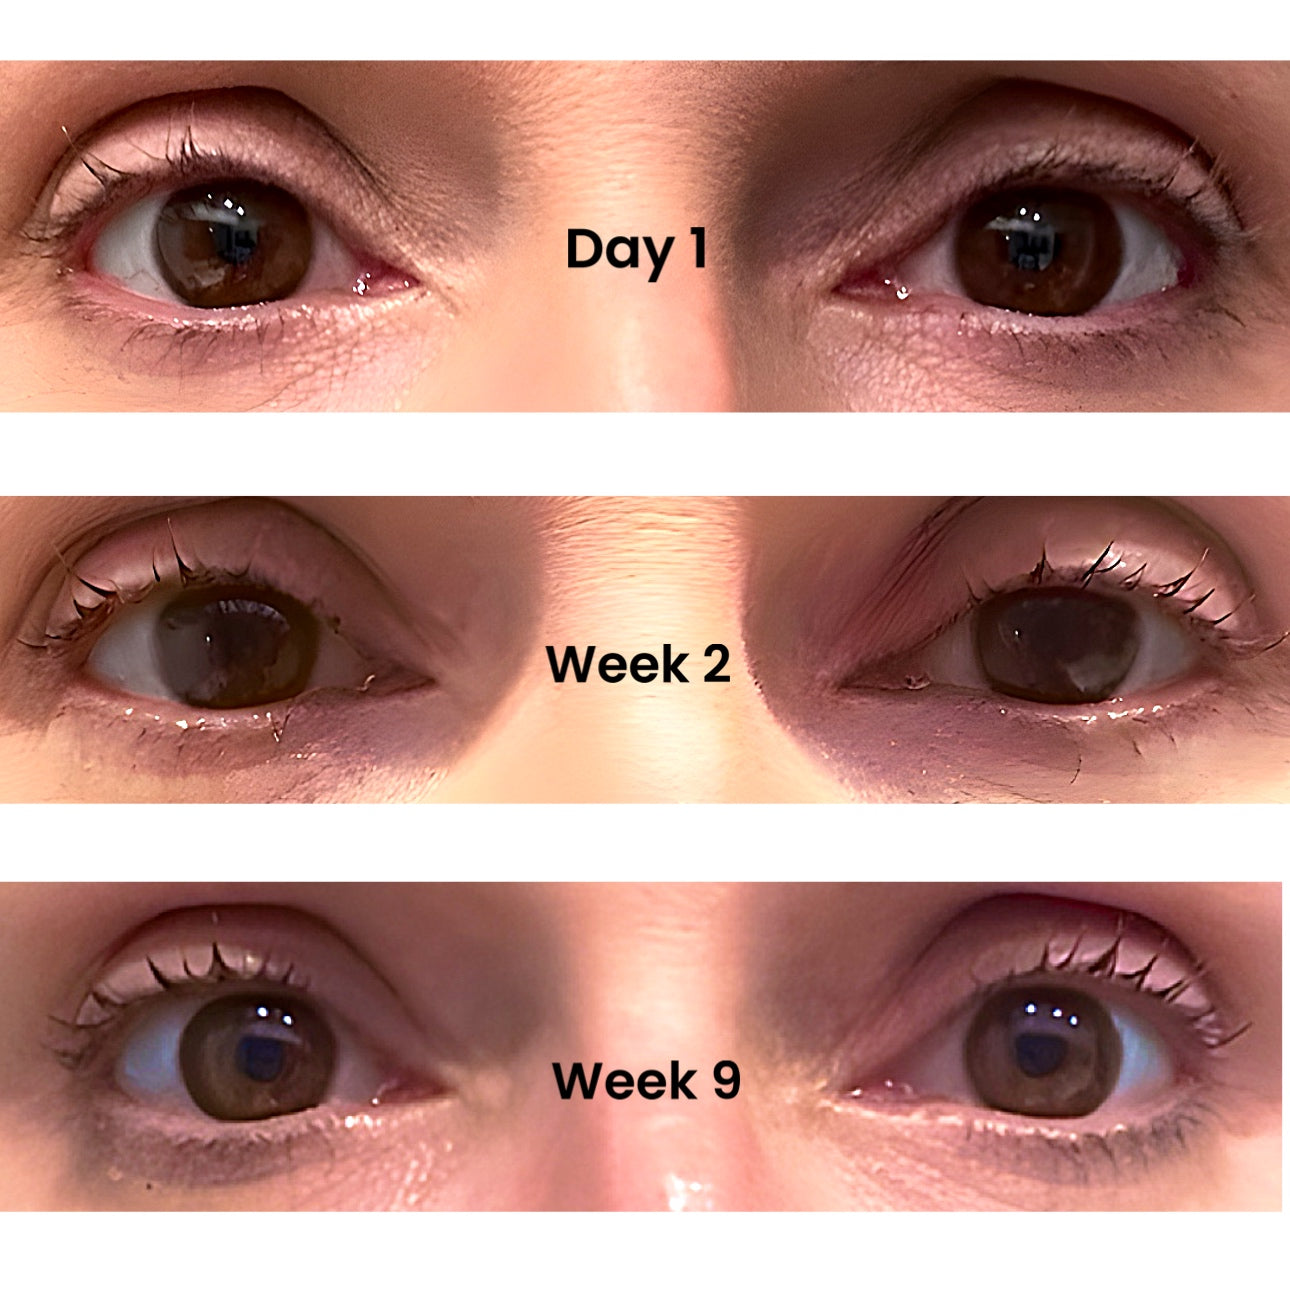 results using brow and lash serum twice daily from day 1 to week 9